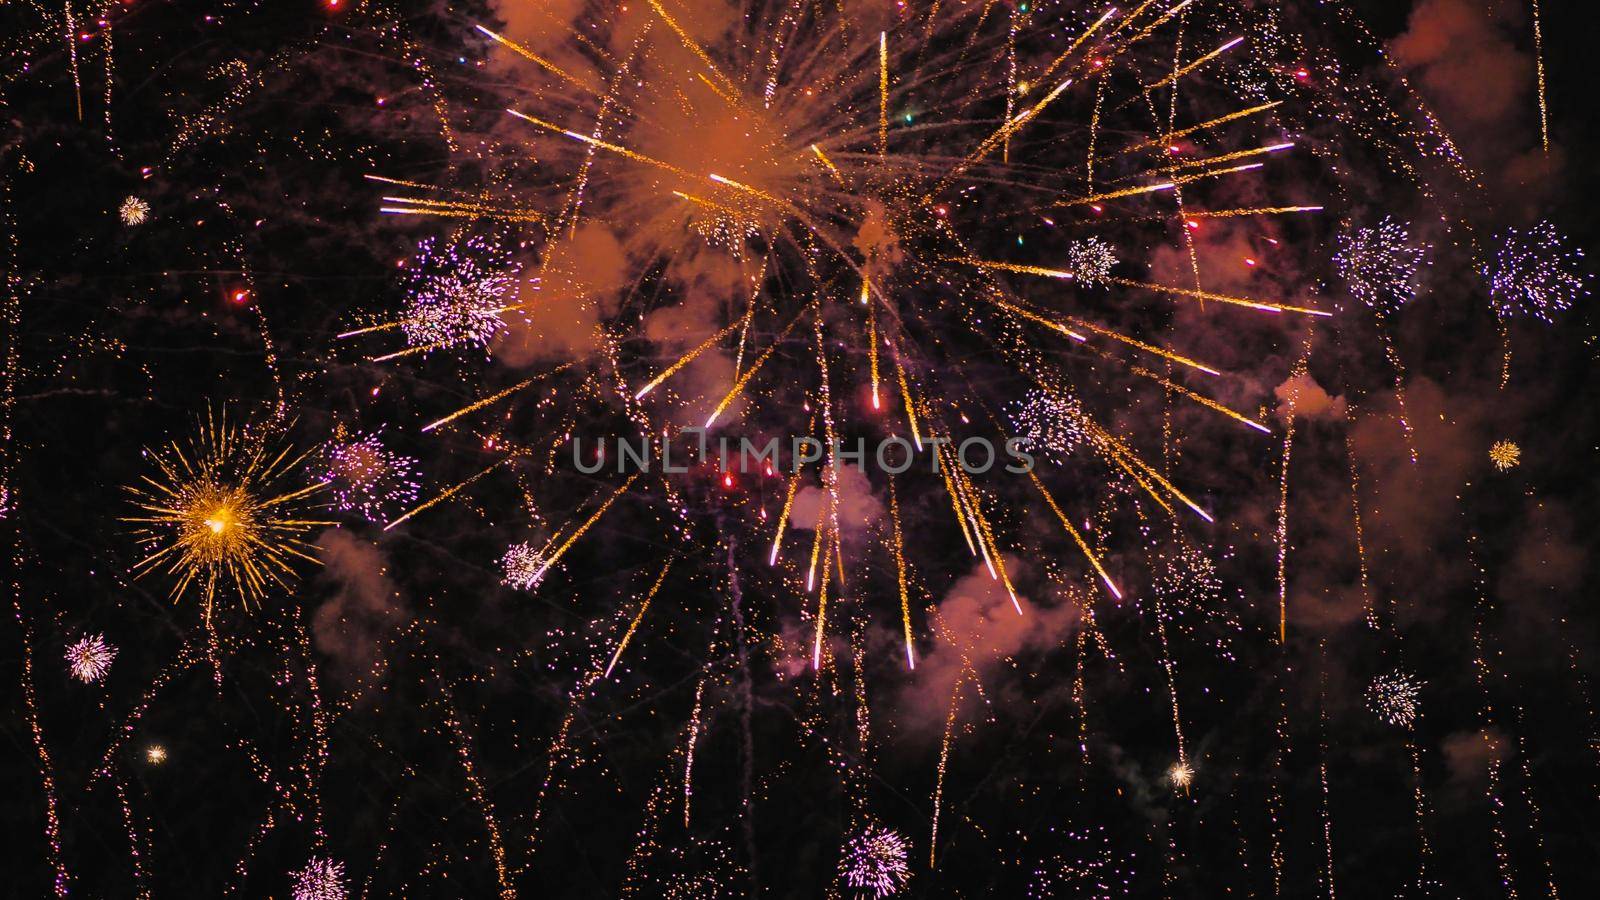 A colourful explosion of fireworks in the night sky